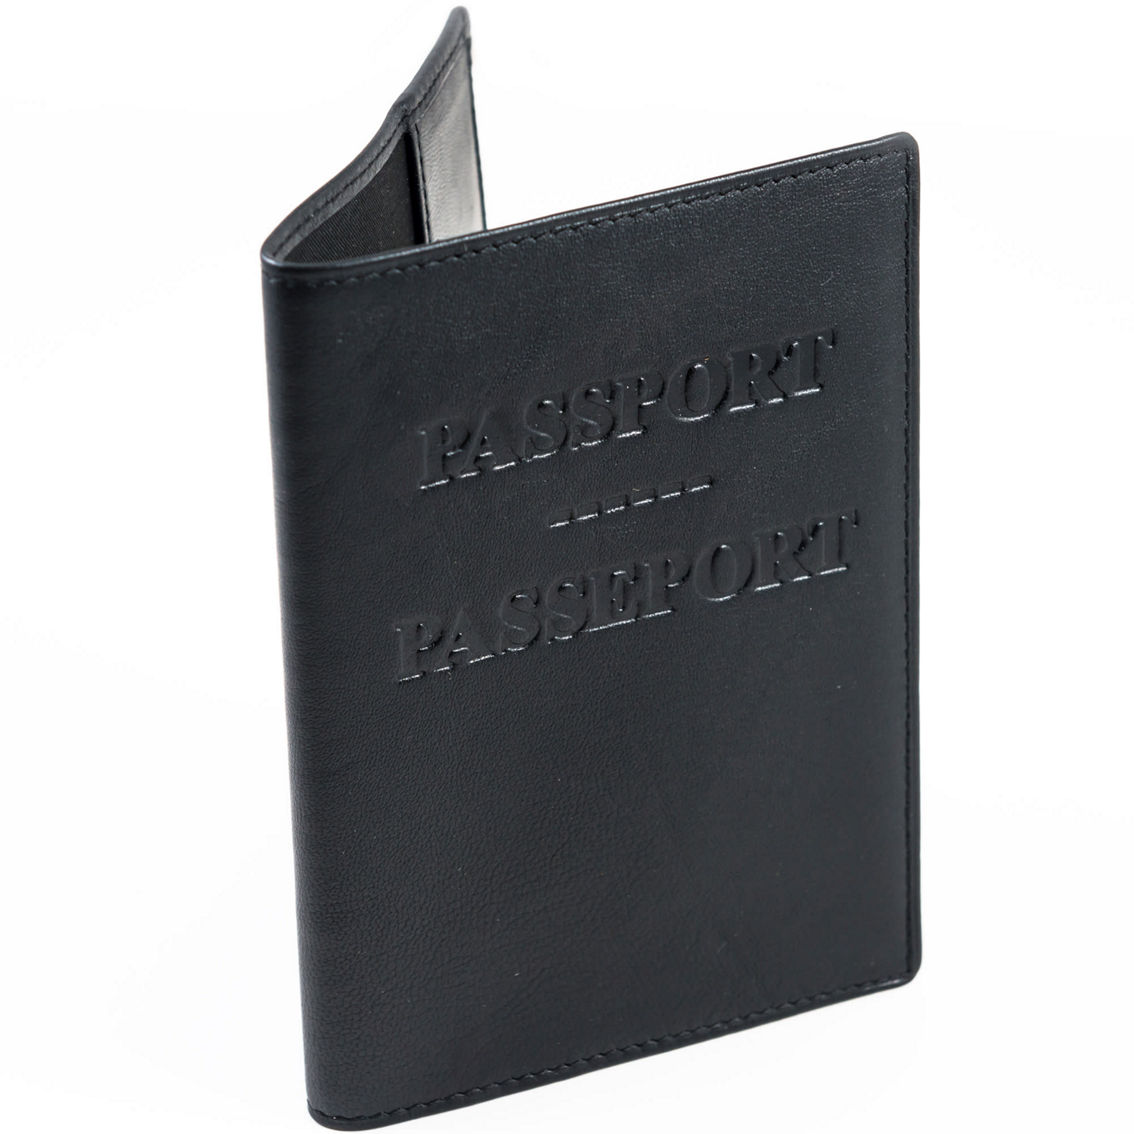 CHAMPS Genuine Leather Passport Holder - Image 4 of 4